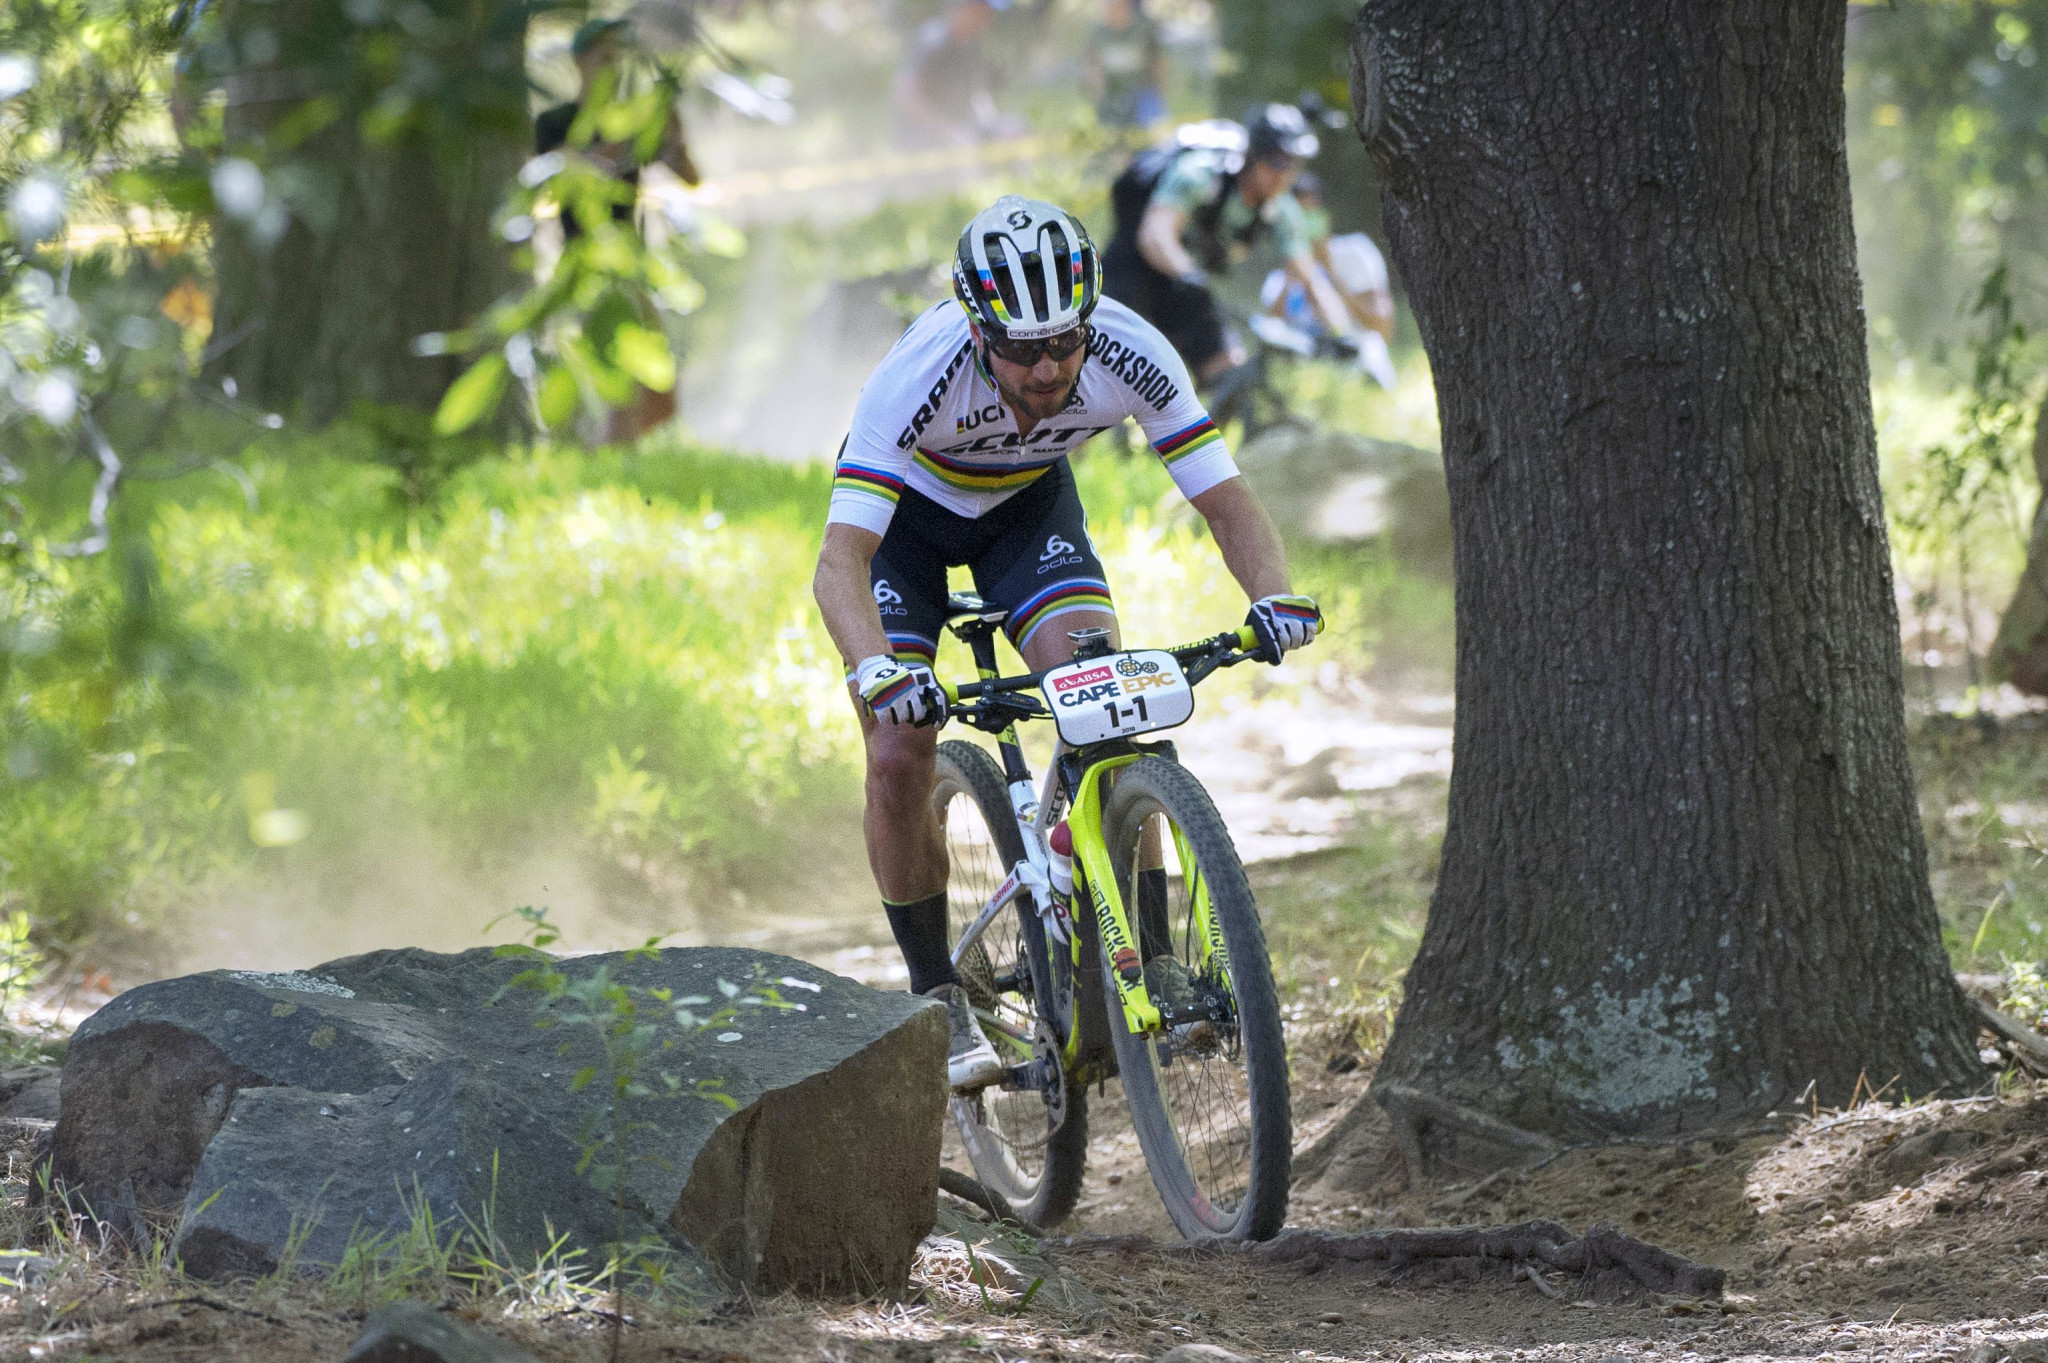 Schurter and Neff seeking another Swiss double at Mountain Bike World Cup